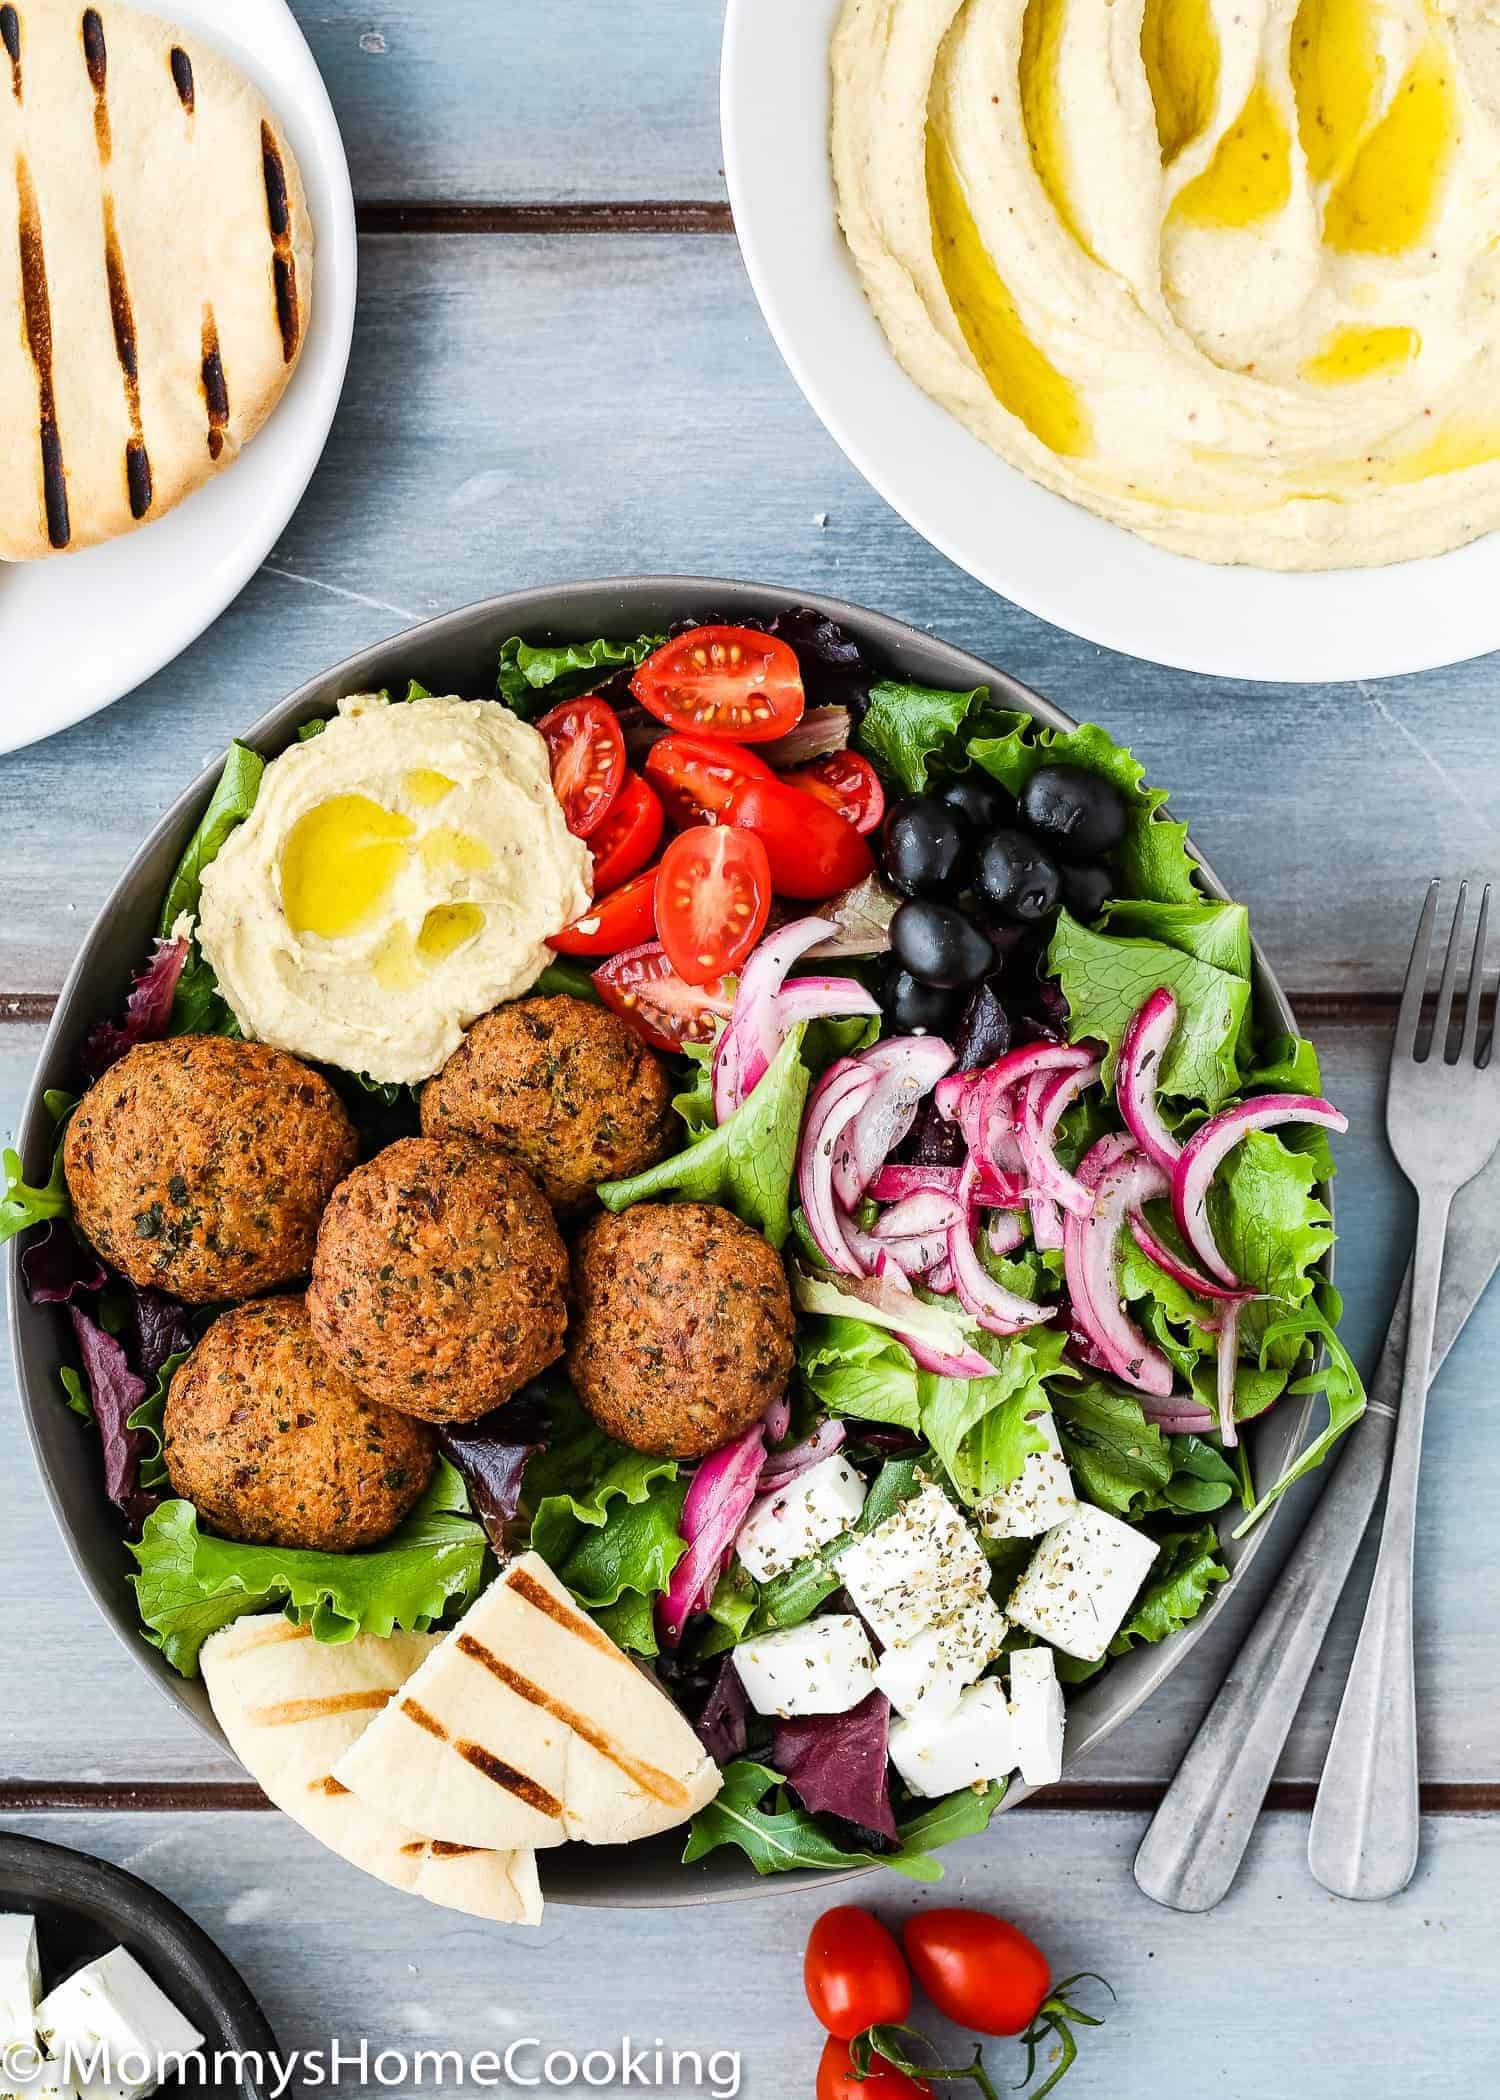 Falafel Salad Bowls with Mustard Hummus | Mommy's Home Cooking